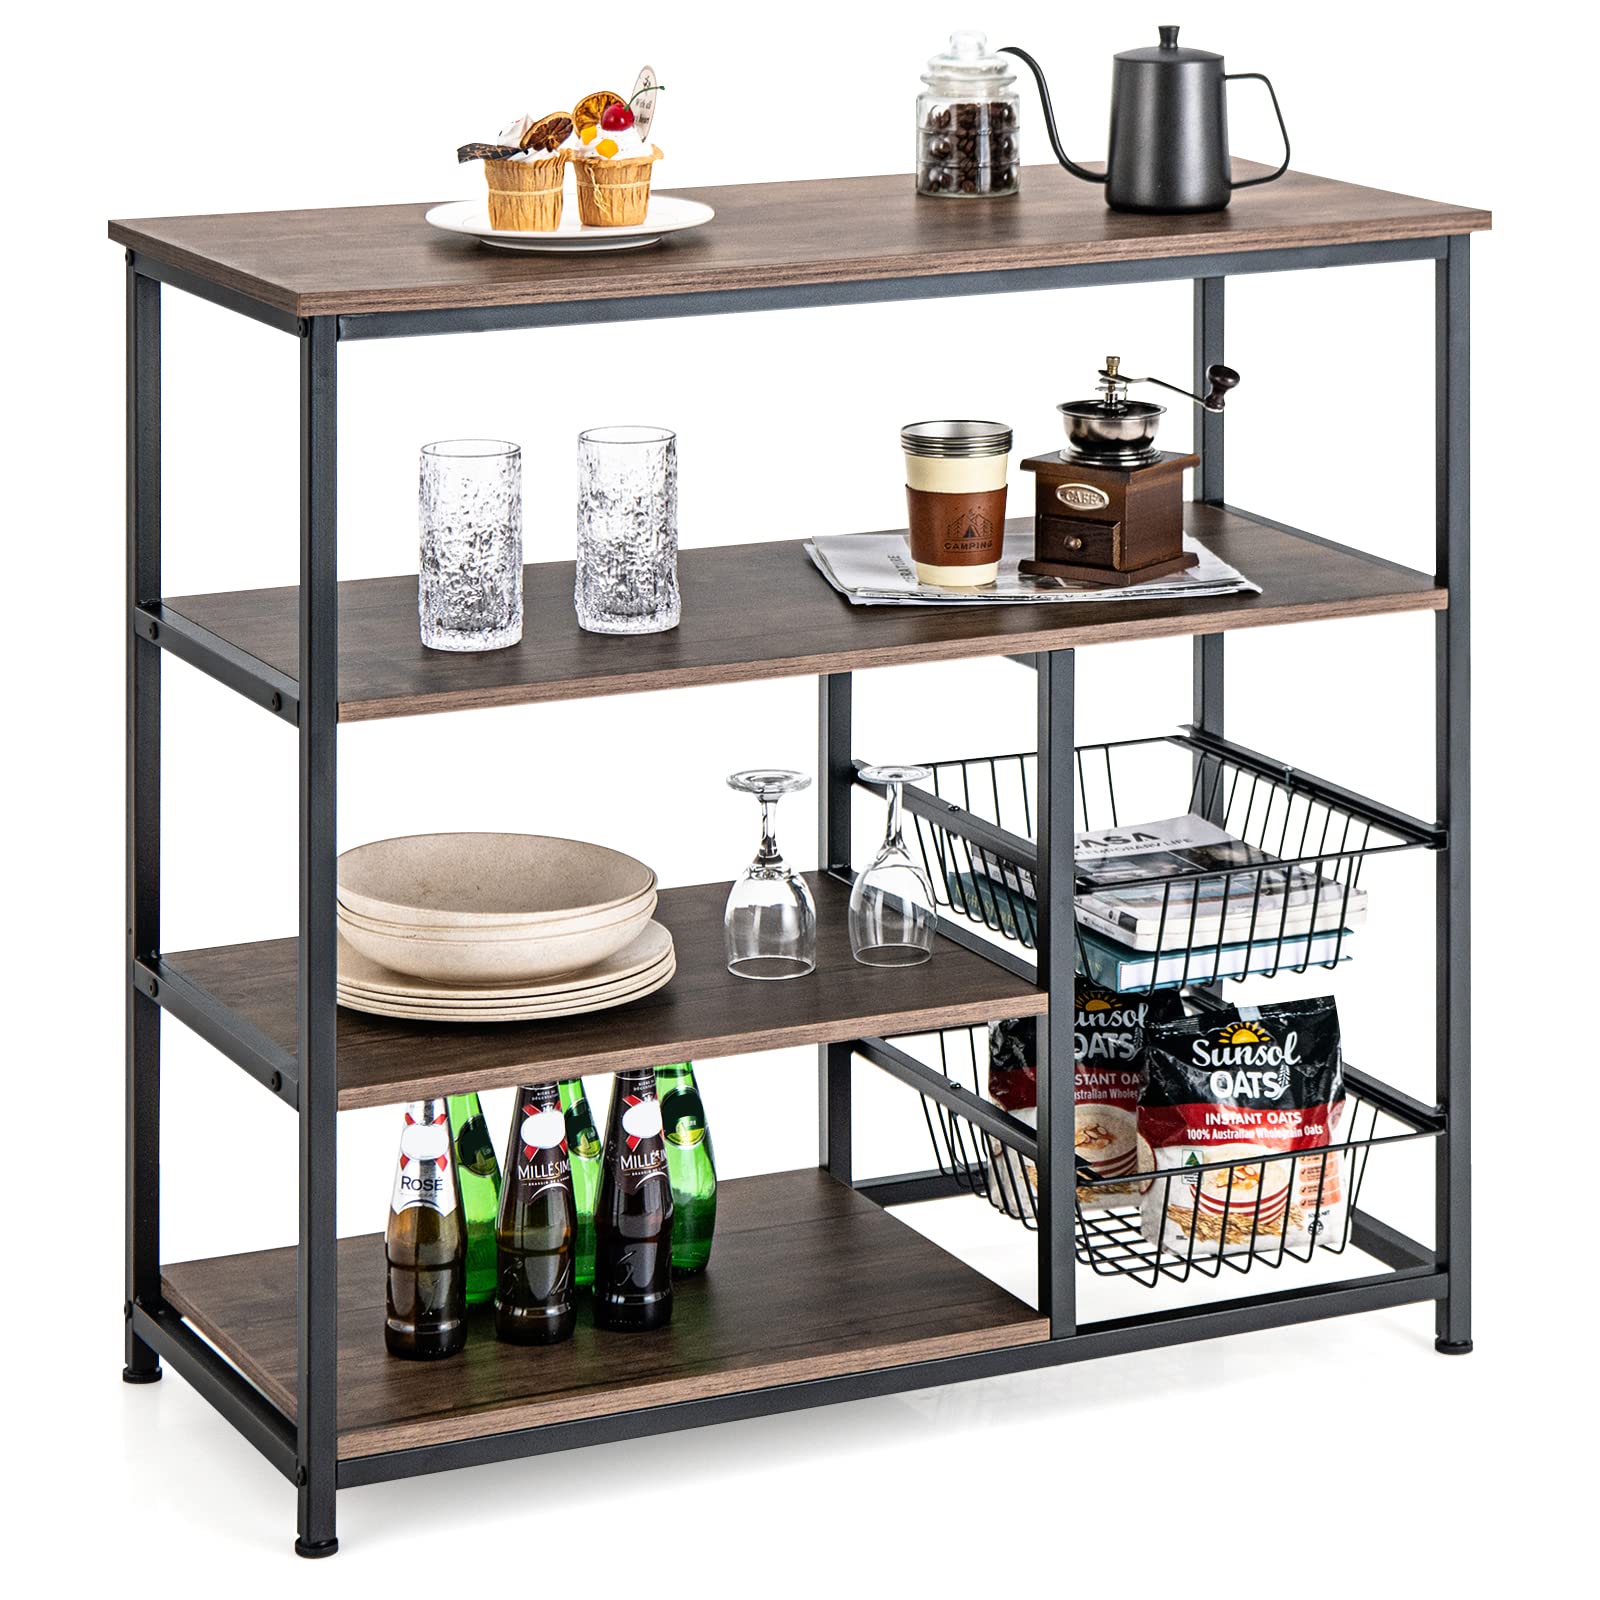 Giantex Kitchen Baker Rack, Industrial Coffee Station with 2 Wire Baskets, 3-Tier Wood Shelves(Brown & Black)